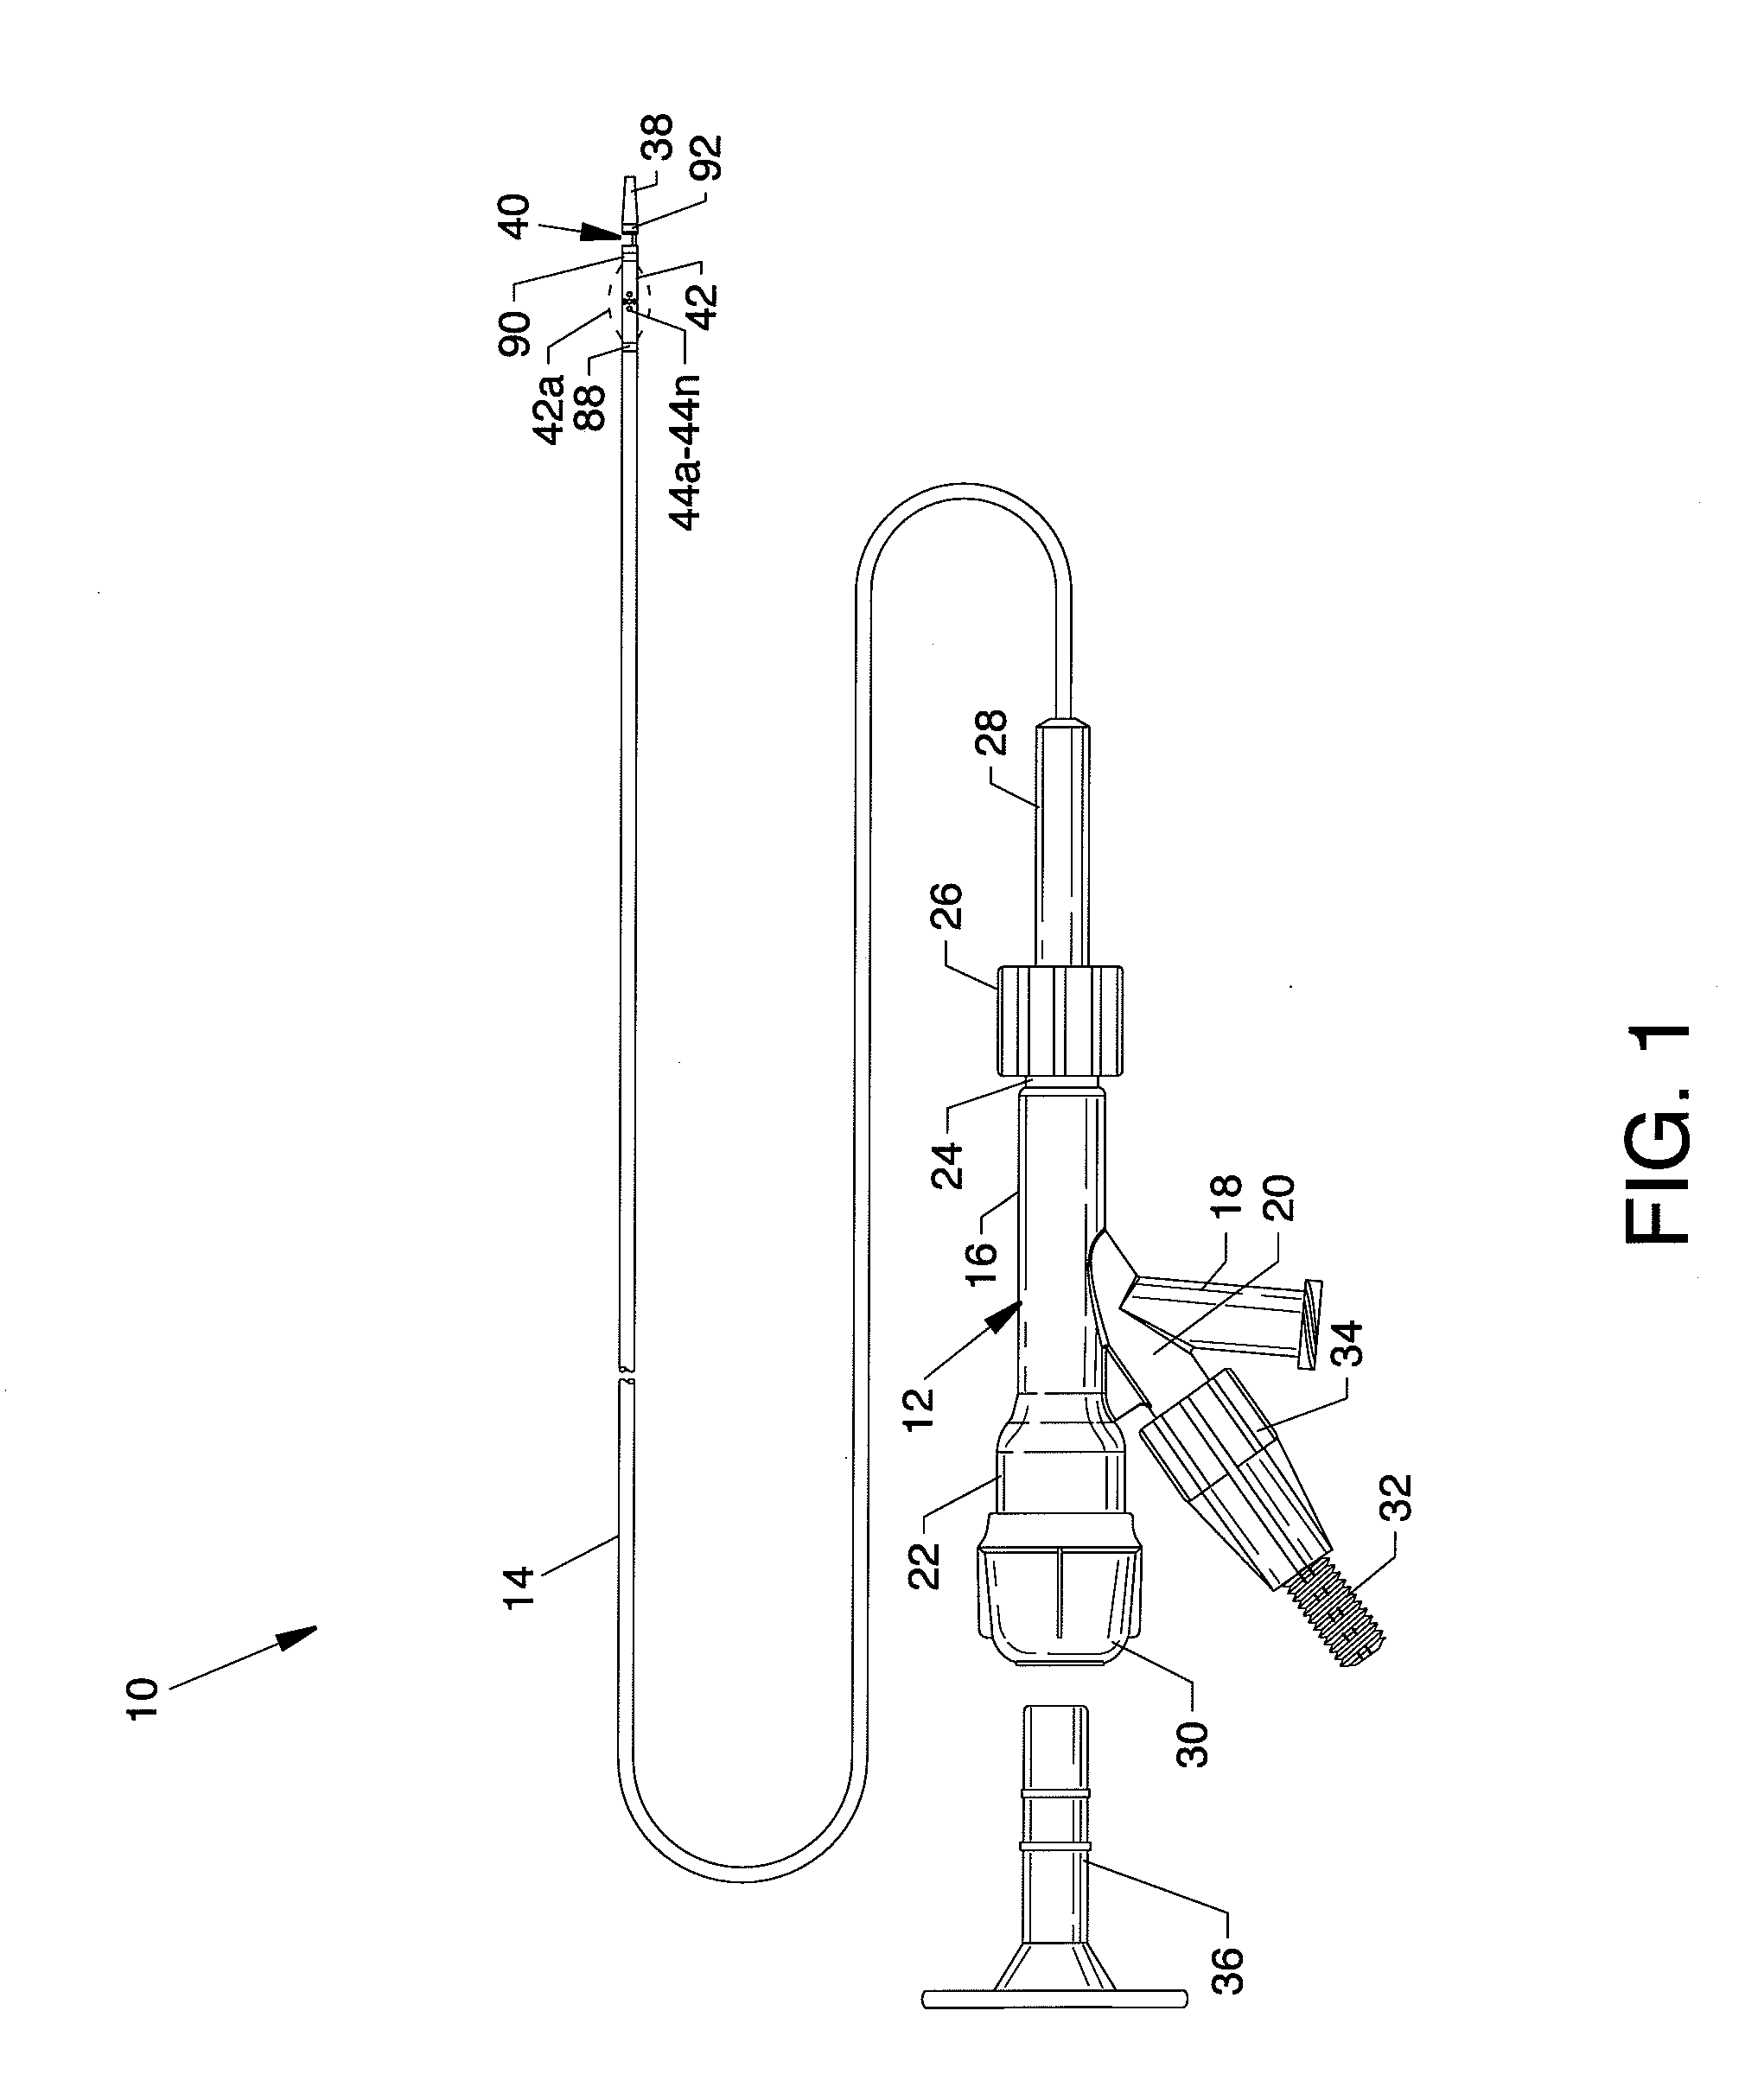 Rheolytic thrombectomy catheter with self-inflating proximal balloon with drug infusion capabilities